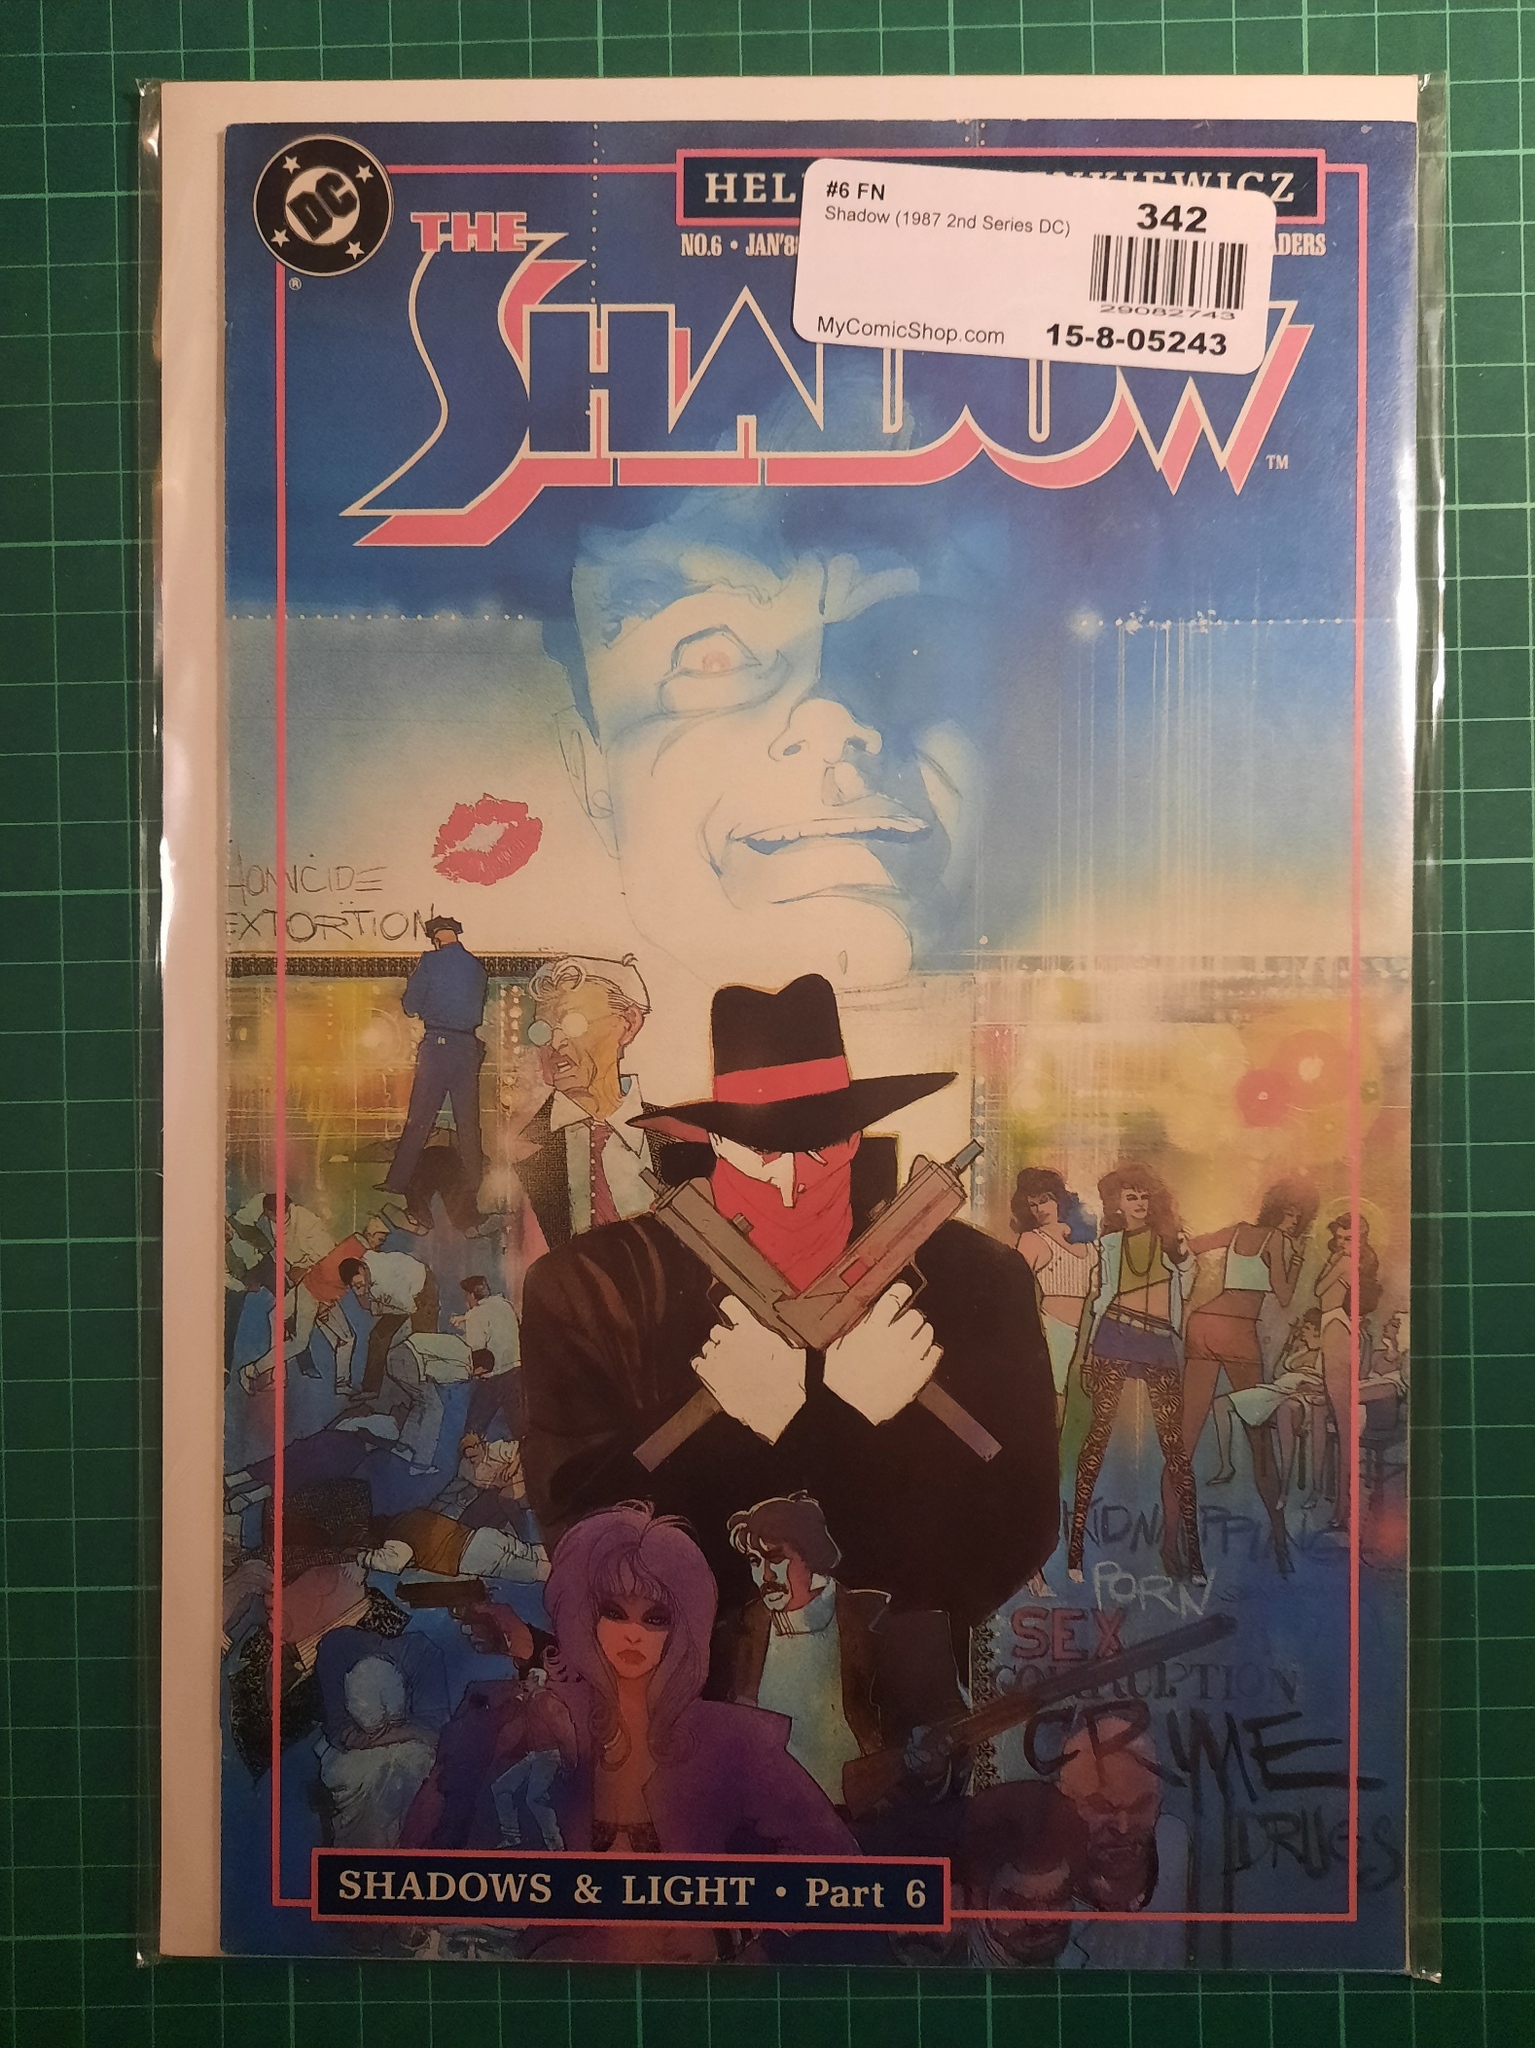 The Shadow #06